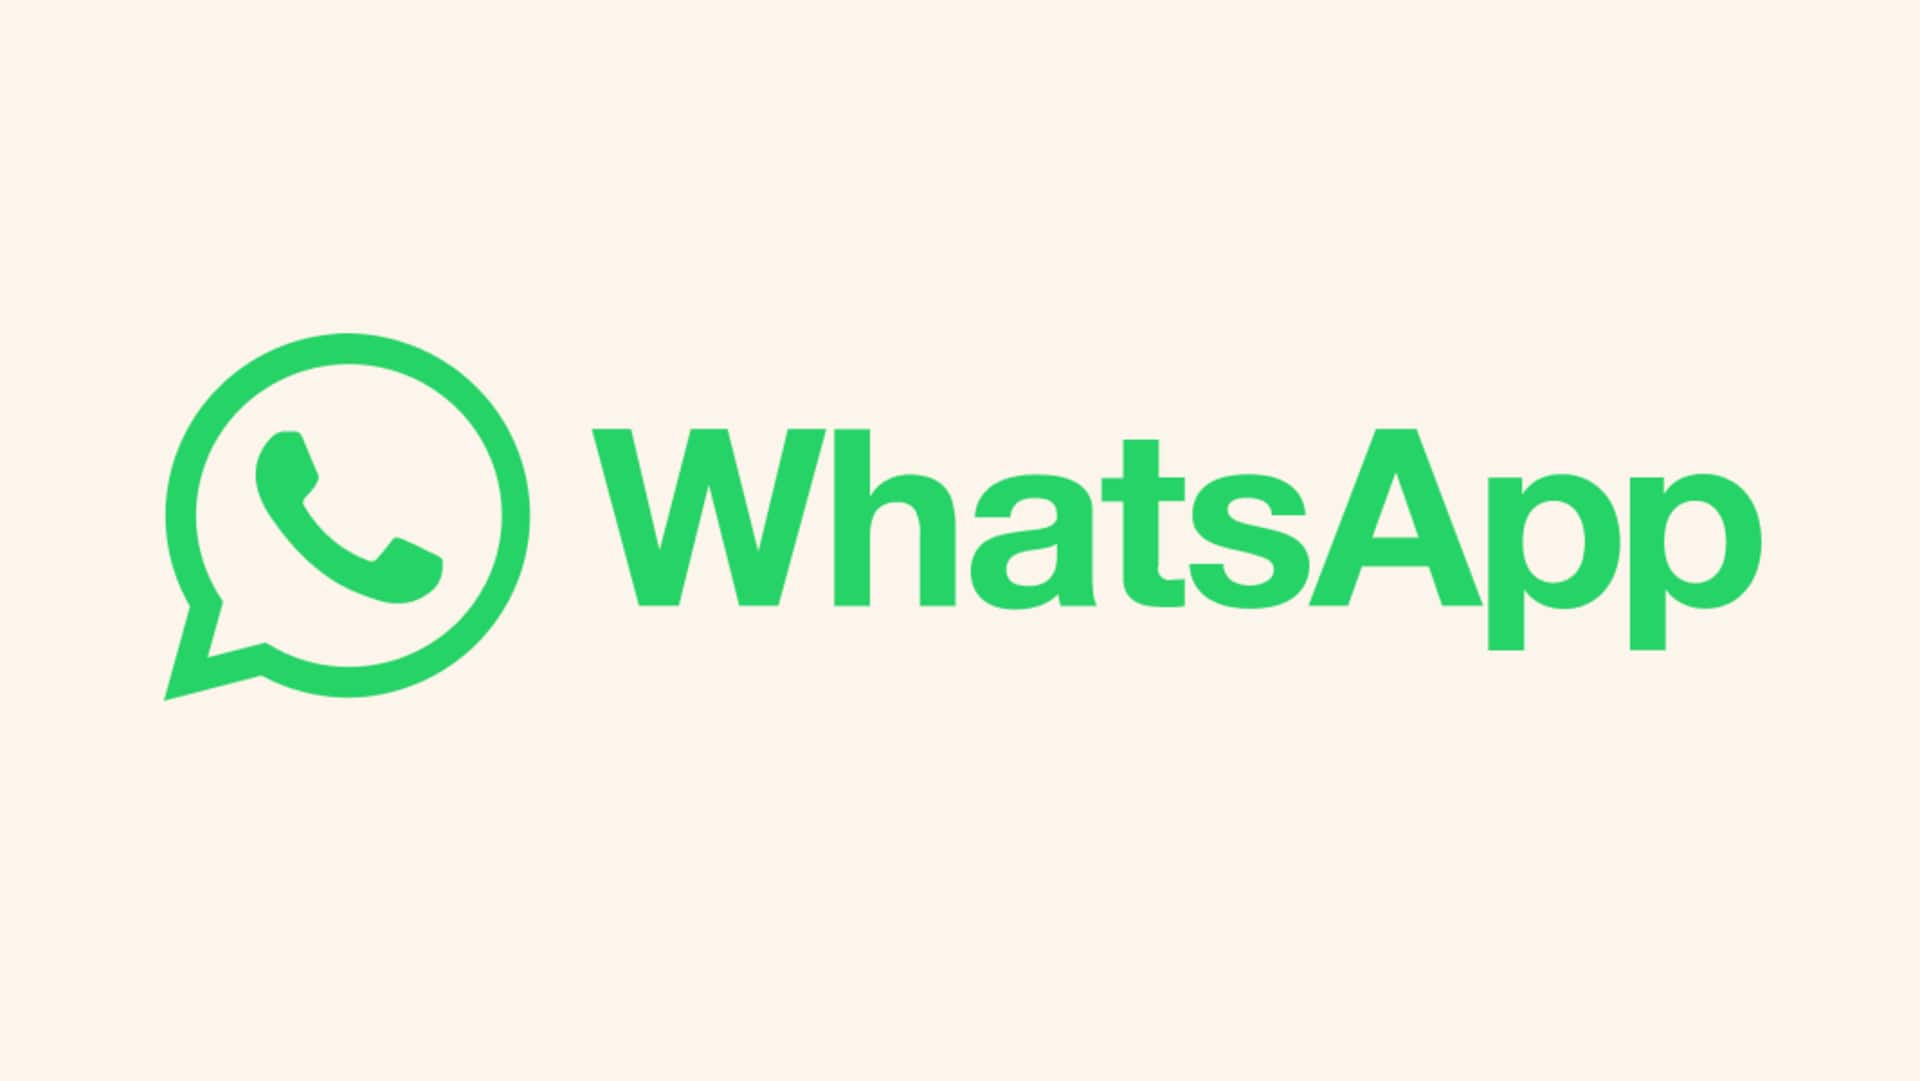 You can now share HD photos on WhatsApp: Here's how